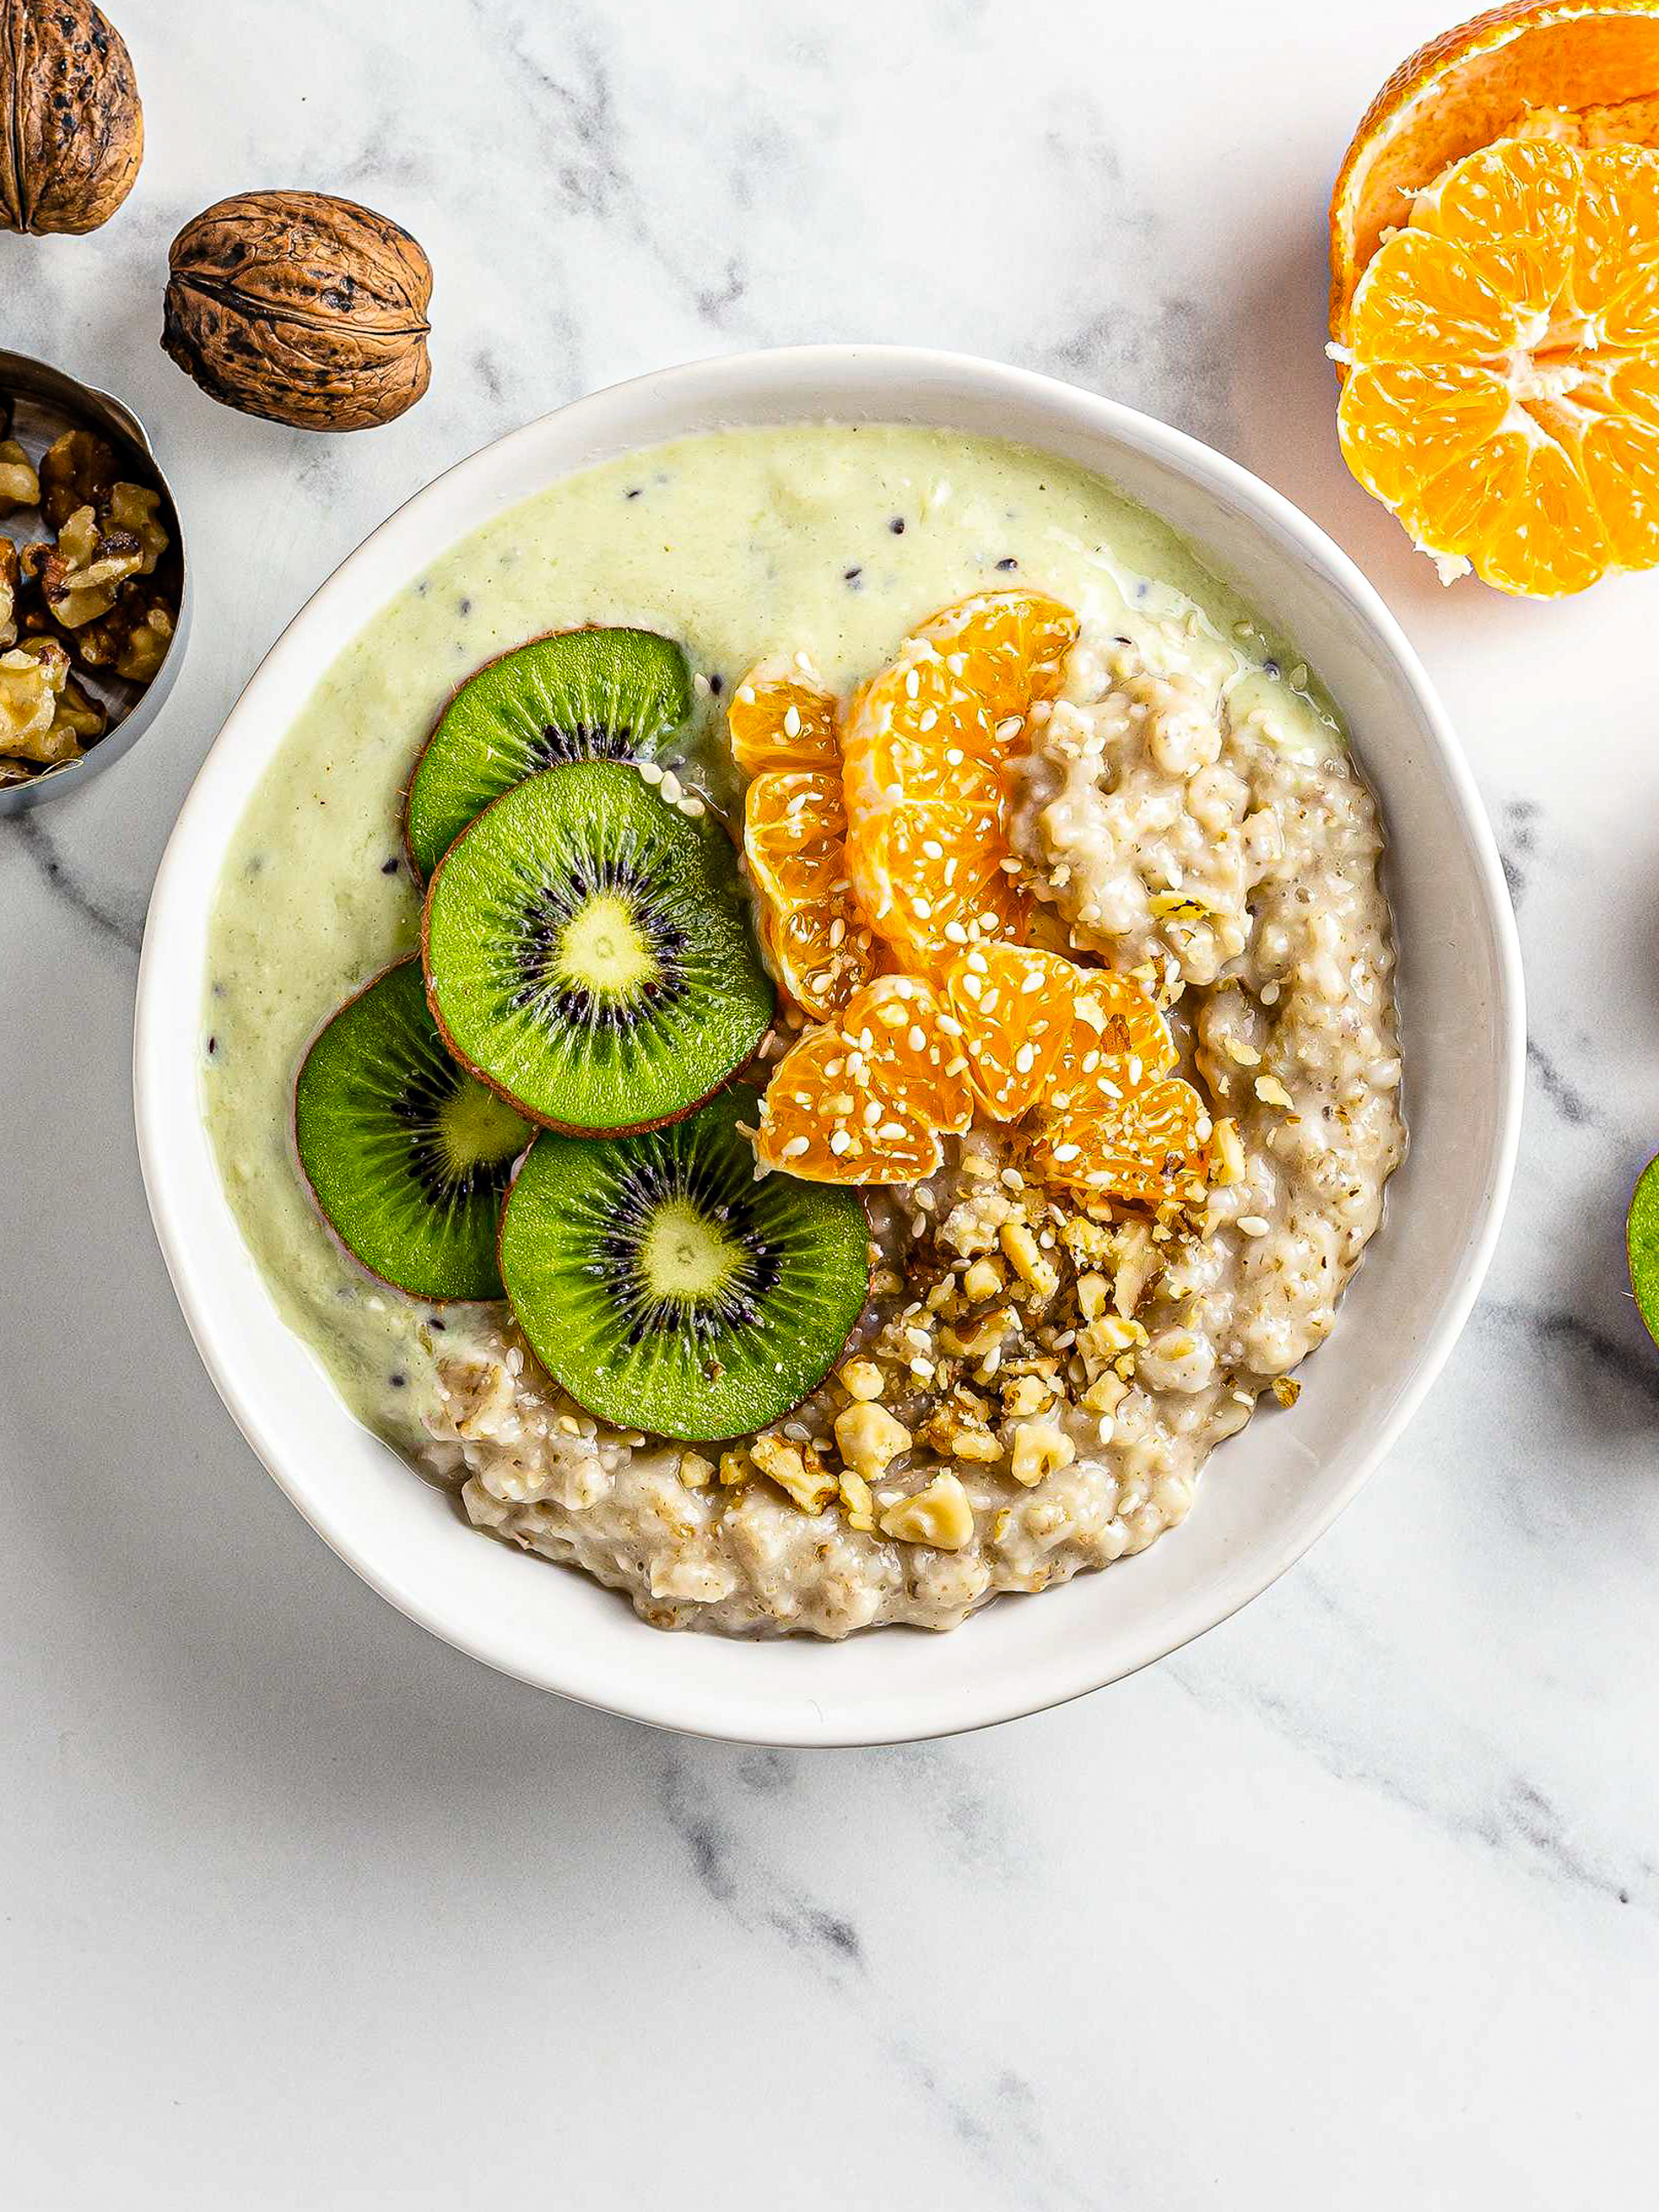 The Best Oatmeal Toppings for Weight Loss